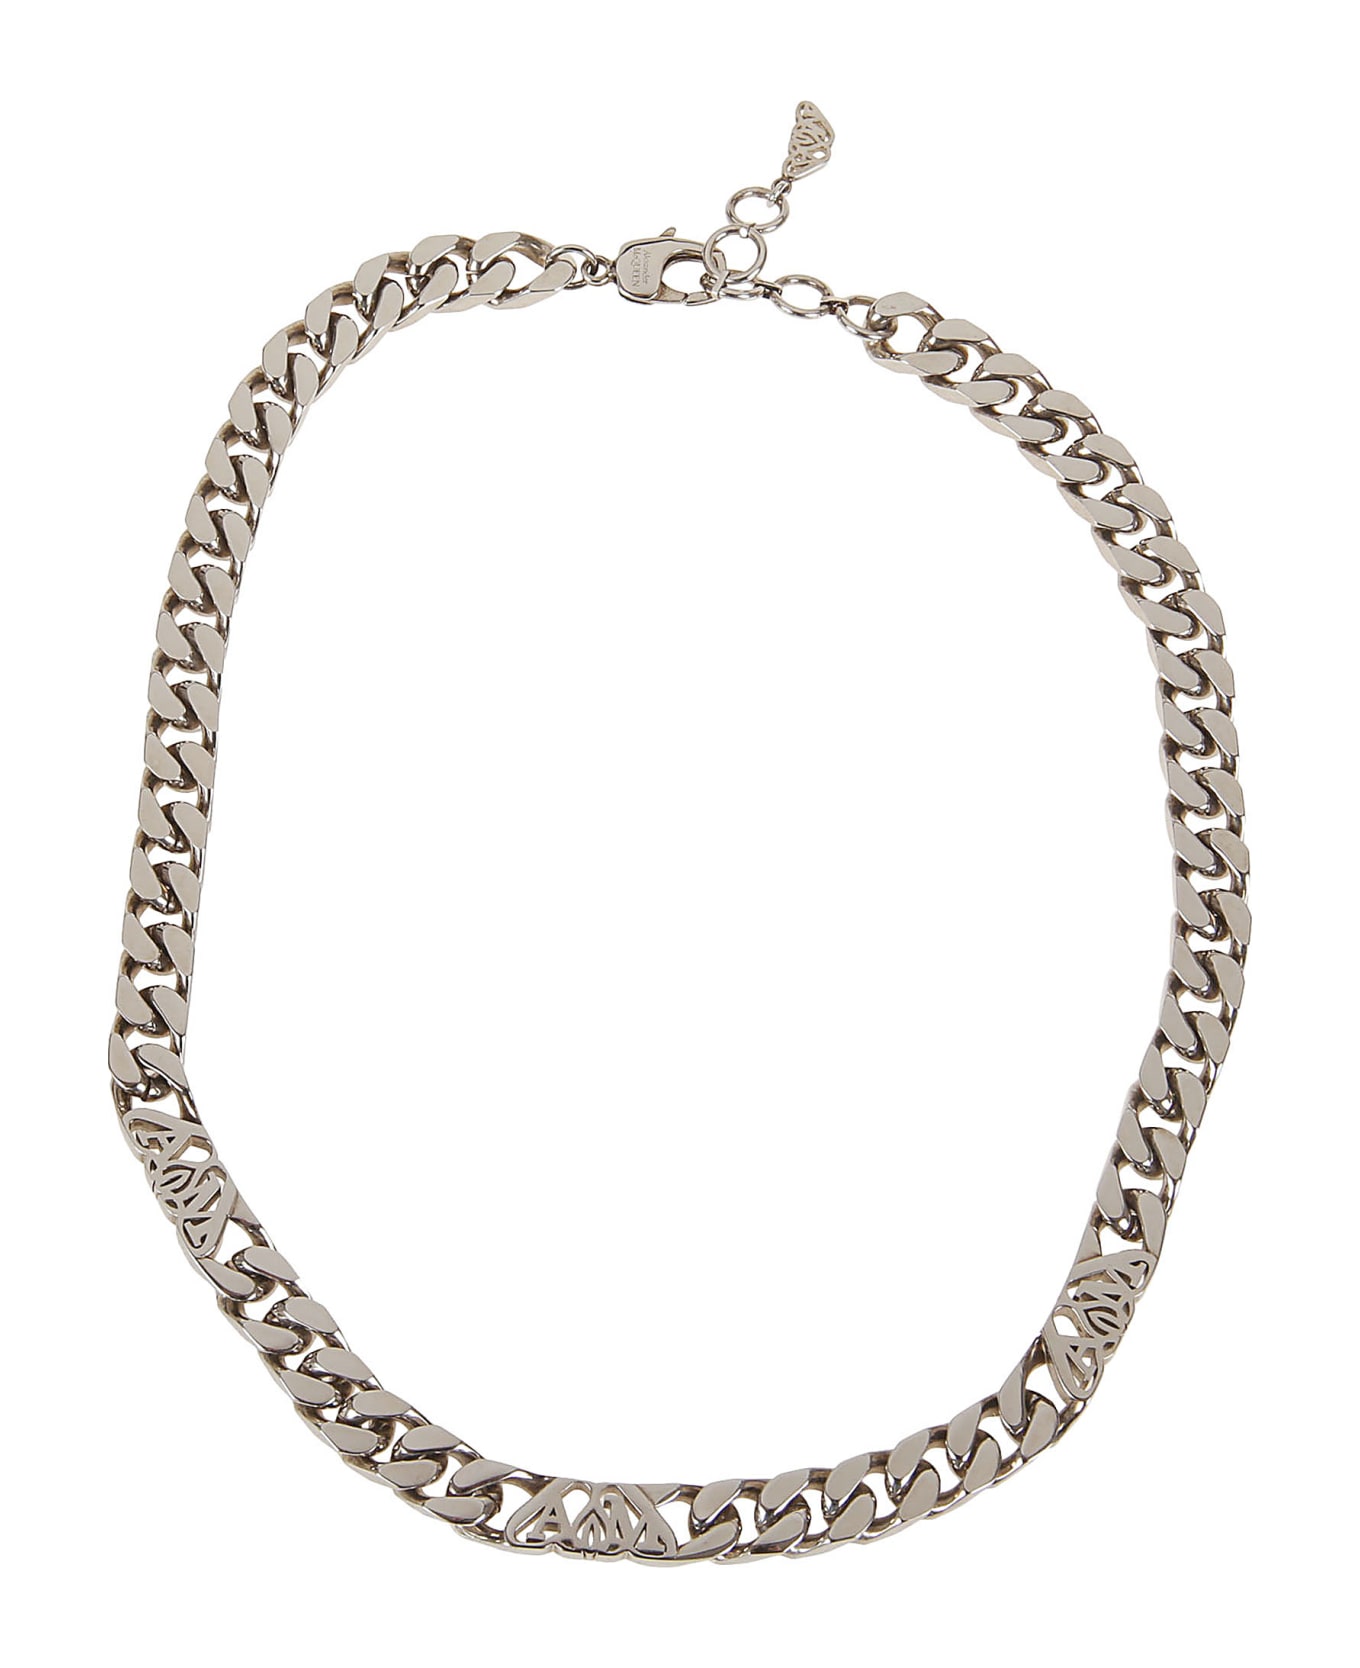 Alexander McQueen Seal Chain Choker - Light Ant Silver ネックレス